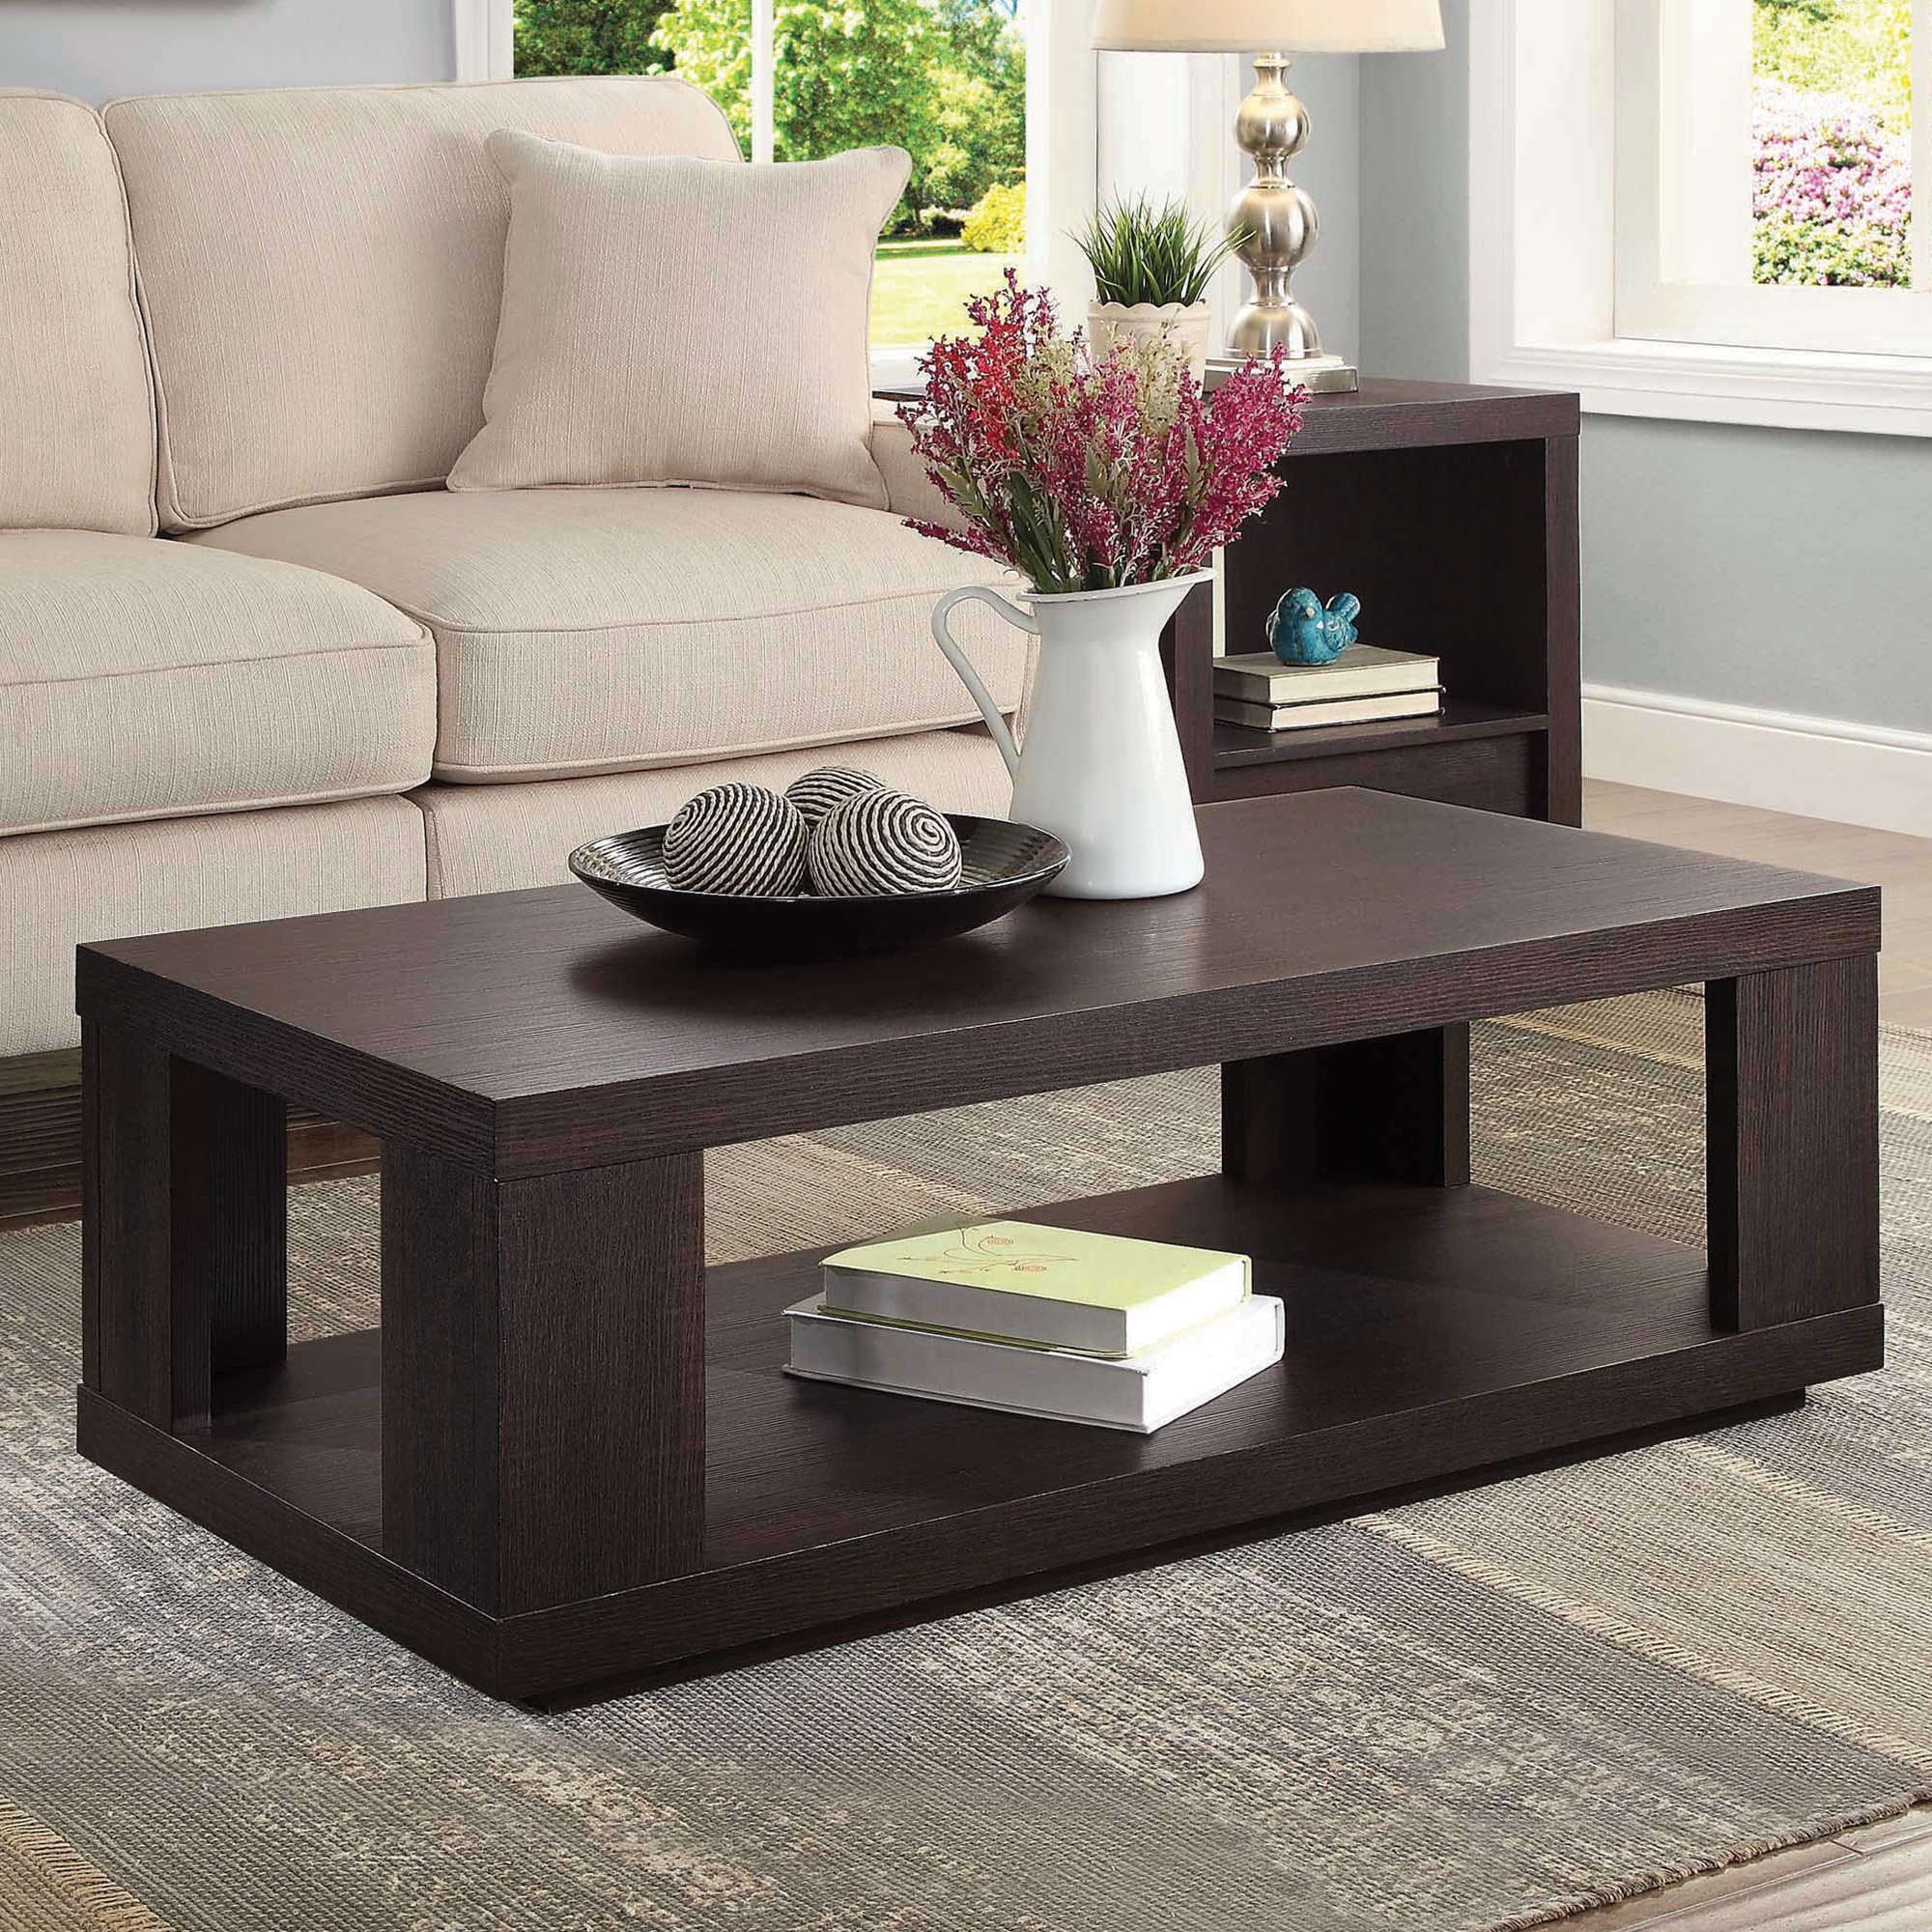 Better Homes & Gardens Steele Coffee Table With India | Ubuy Pertaining To Espresso Wood Finish Coffee Tables (View 9 of 15)